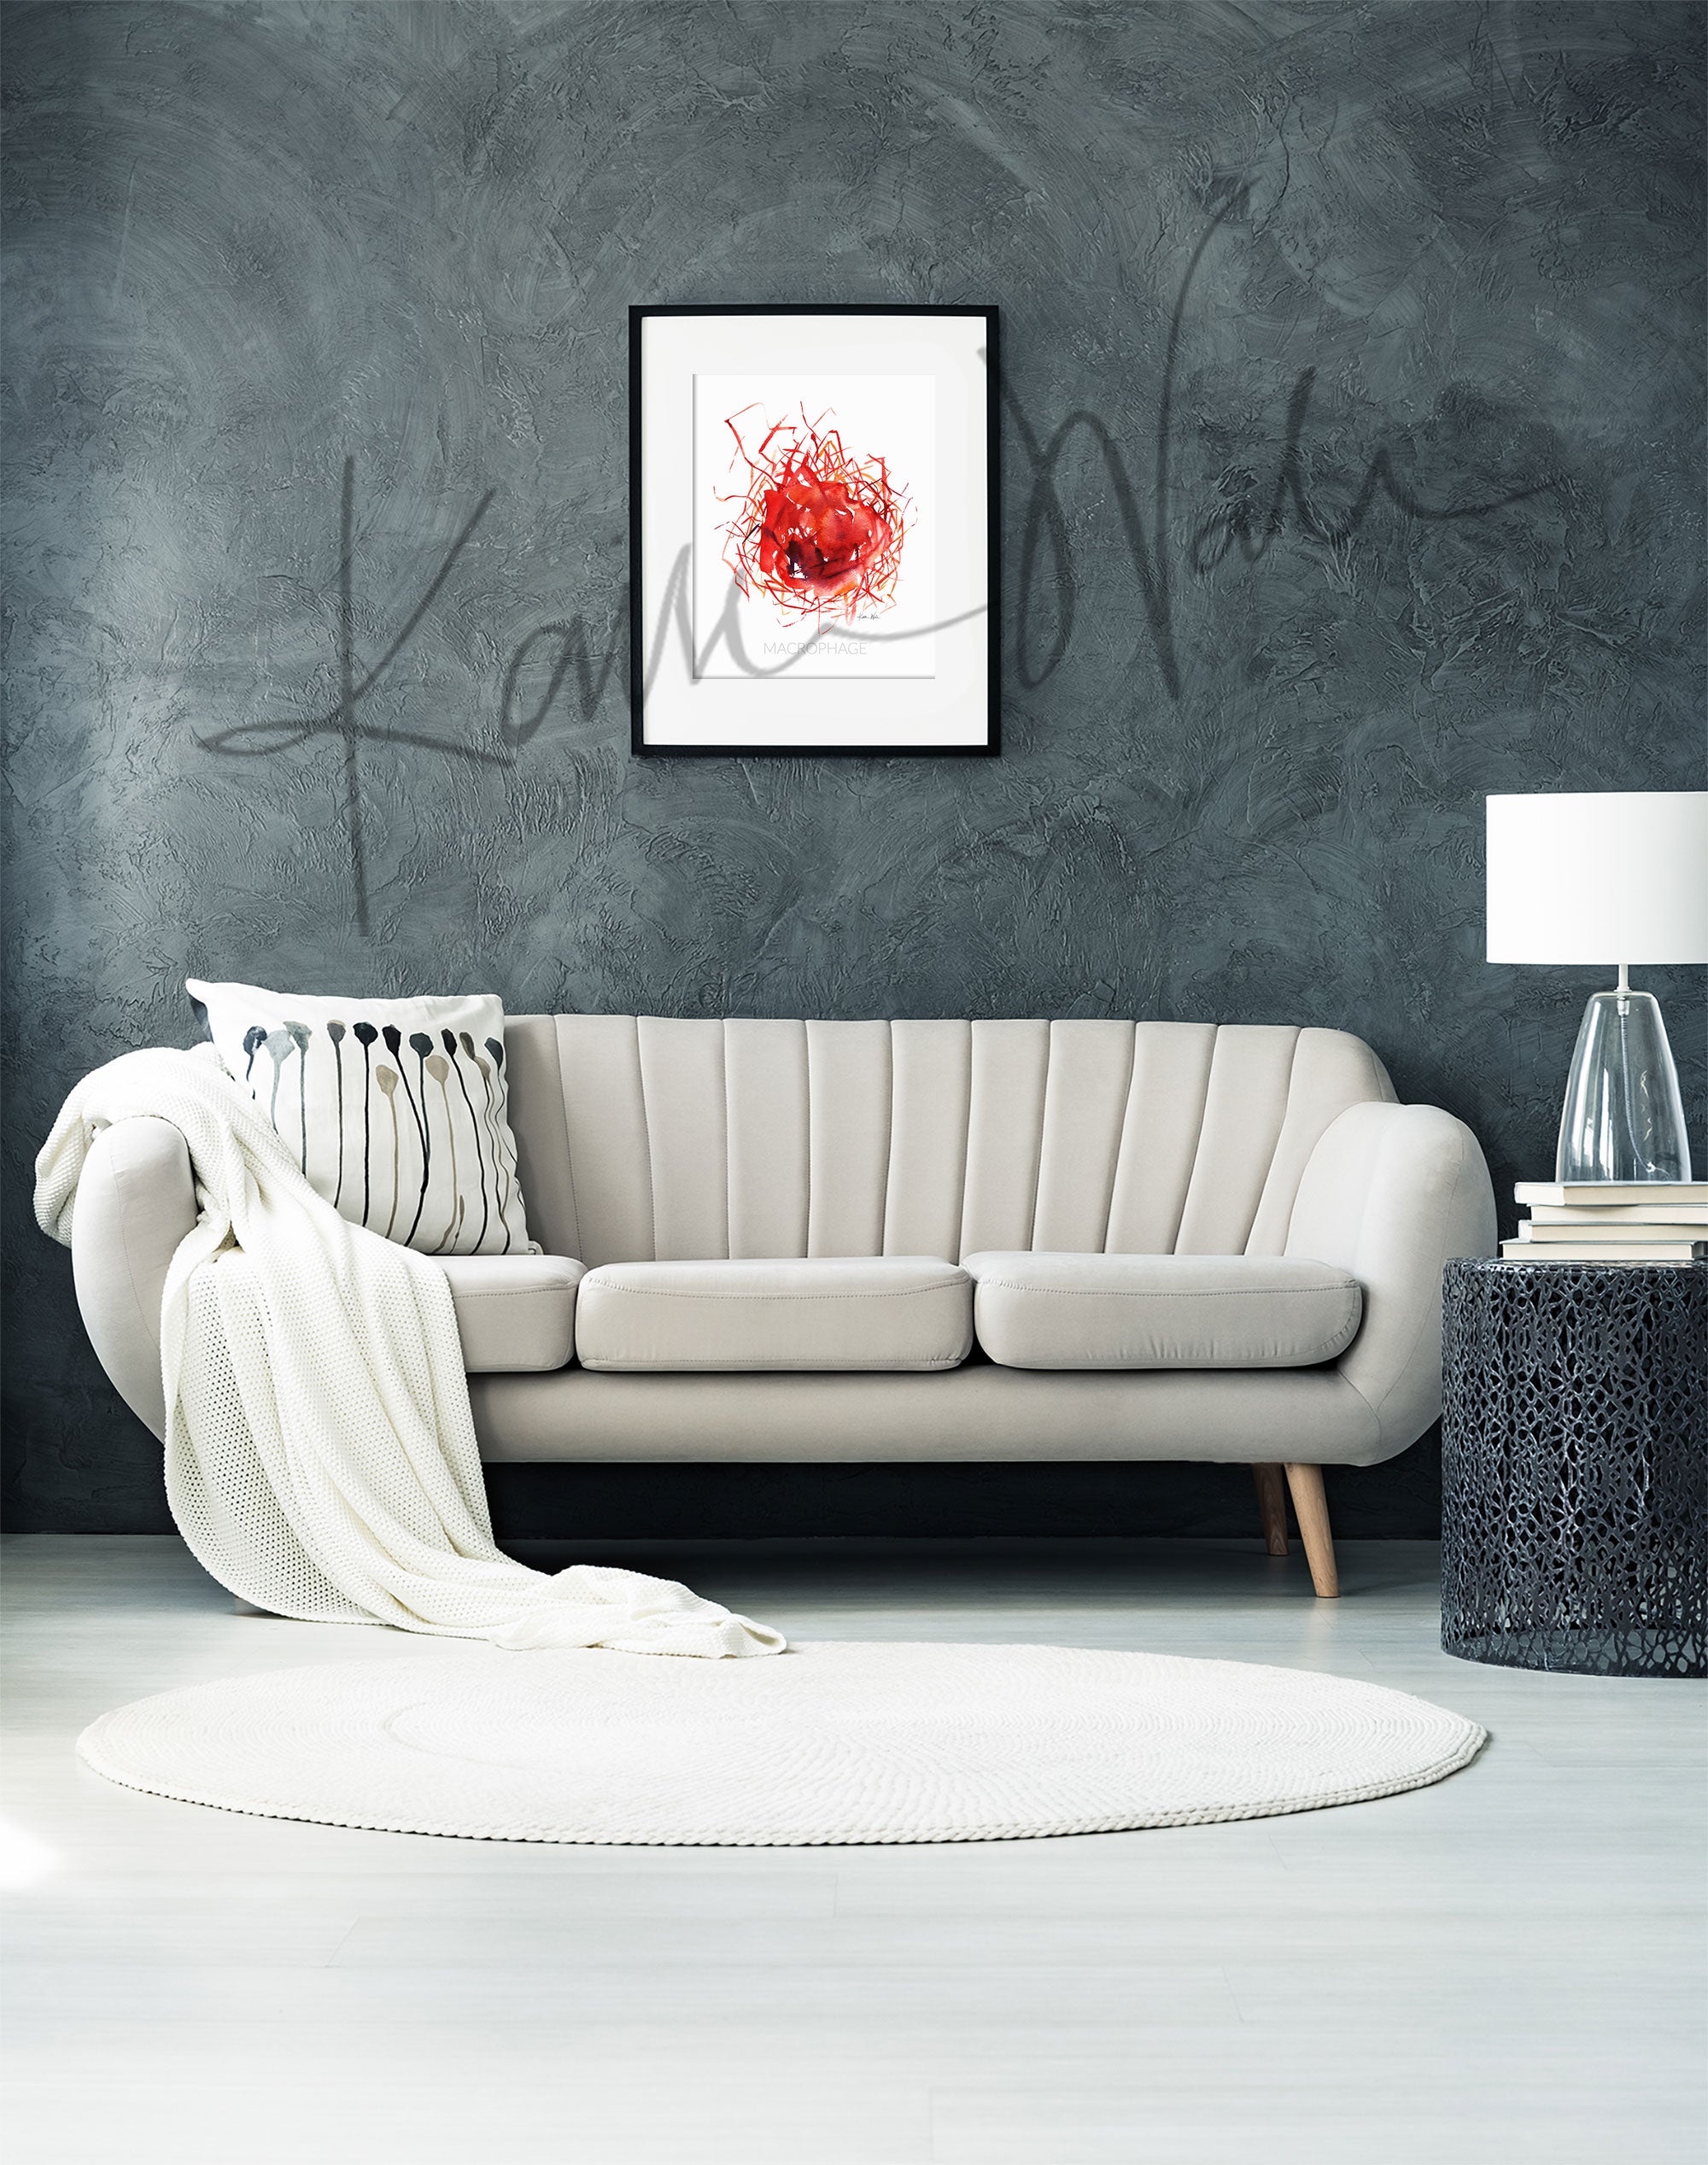 Framed watercolor painting of a macrophage cell. The painting is hanging over a white couch.